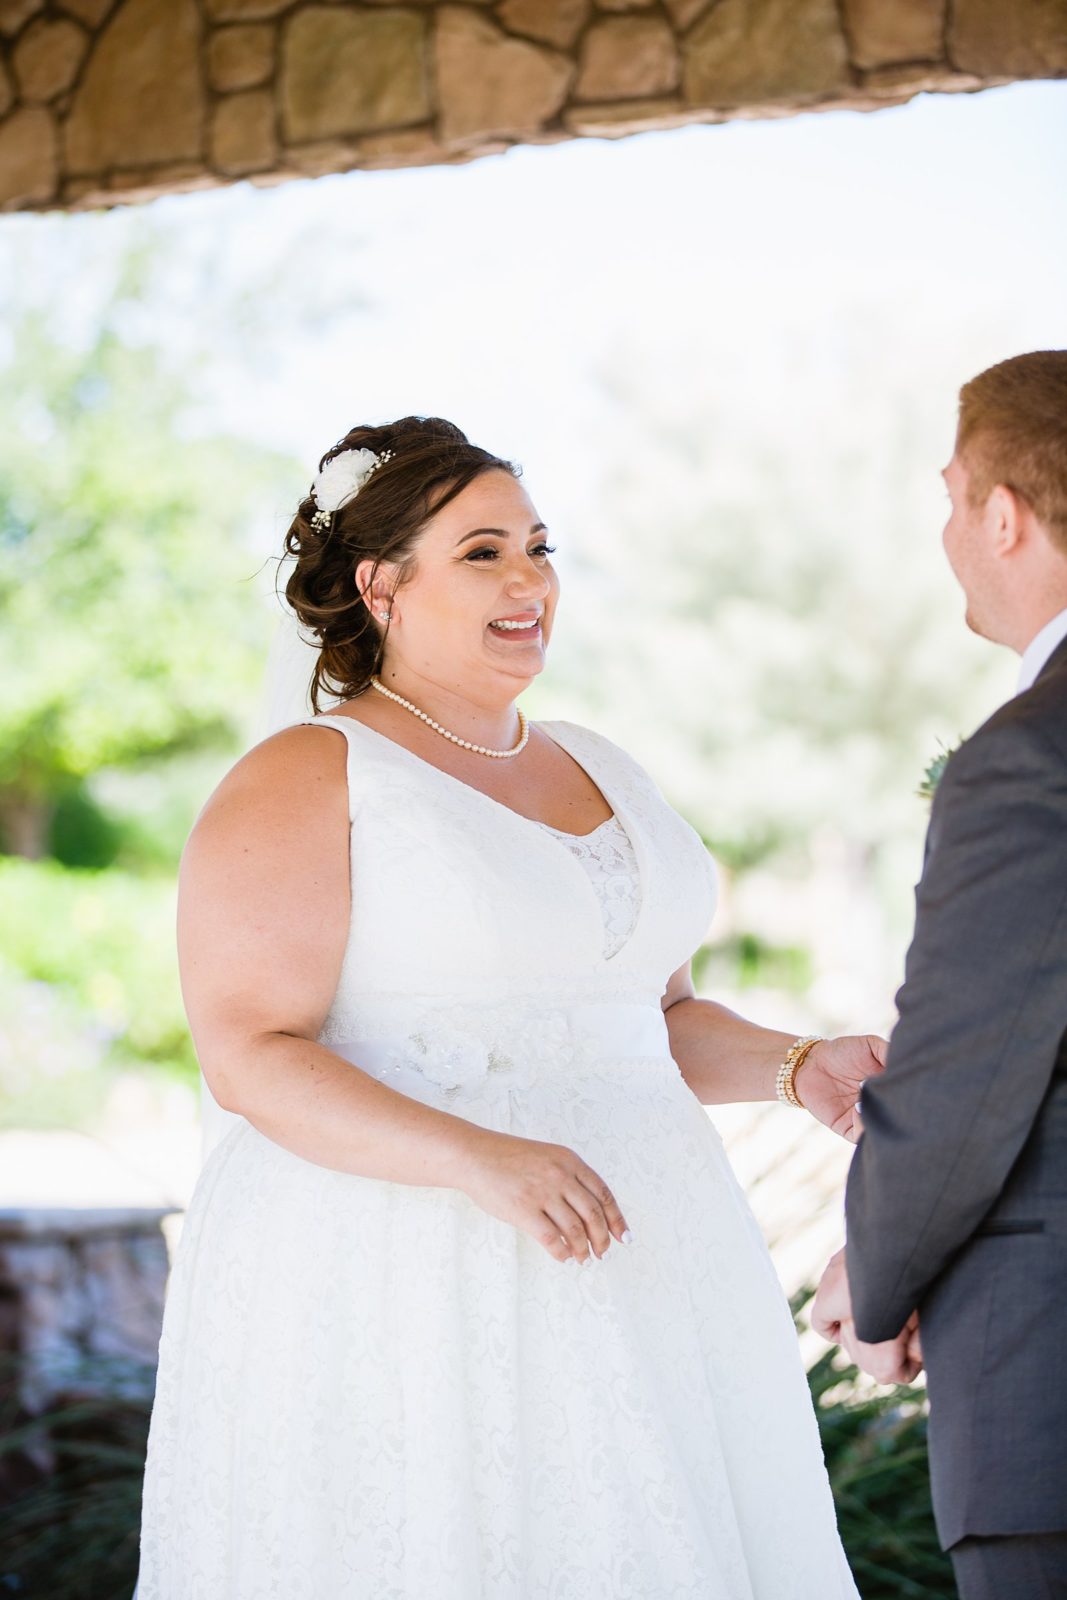 Bride and Groom's first look at Superstition Manor by Arizona wedding photographer PMA Photography.